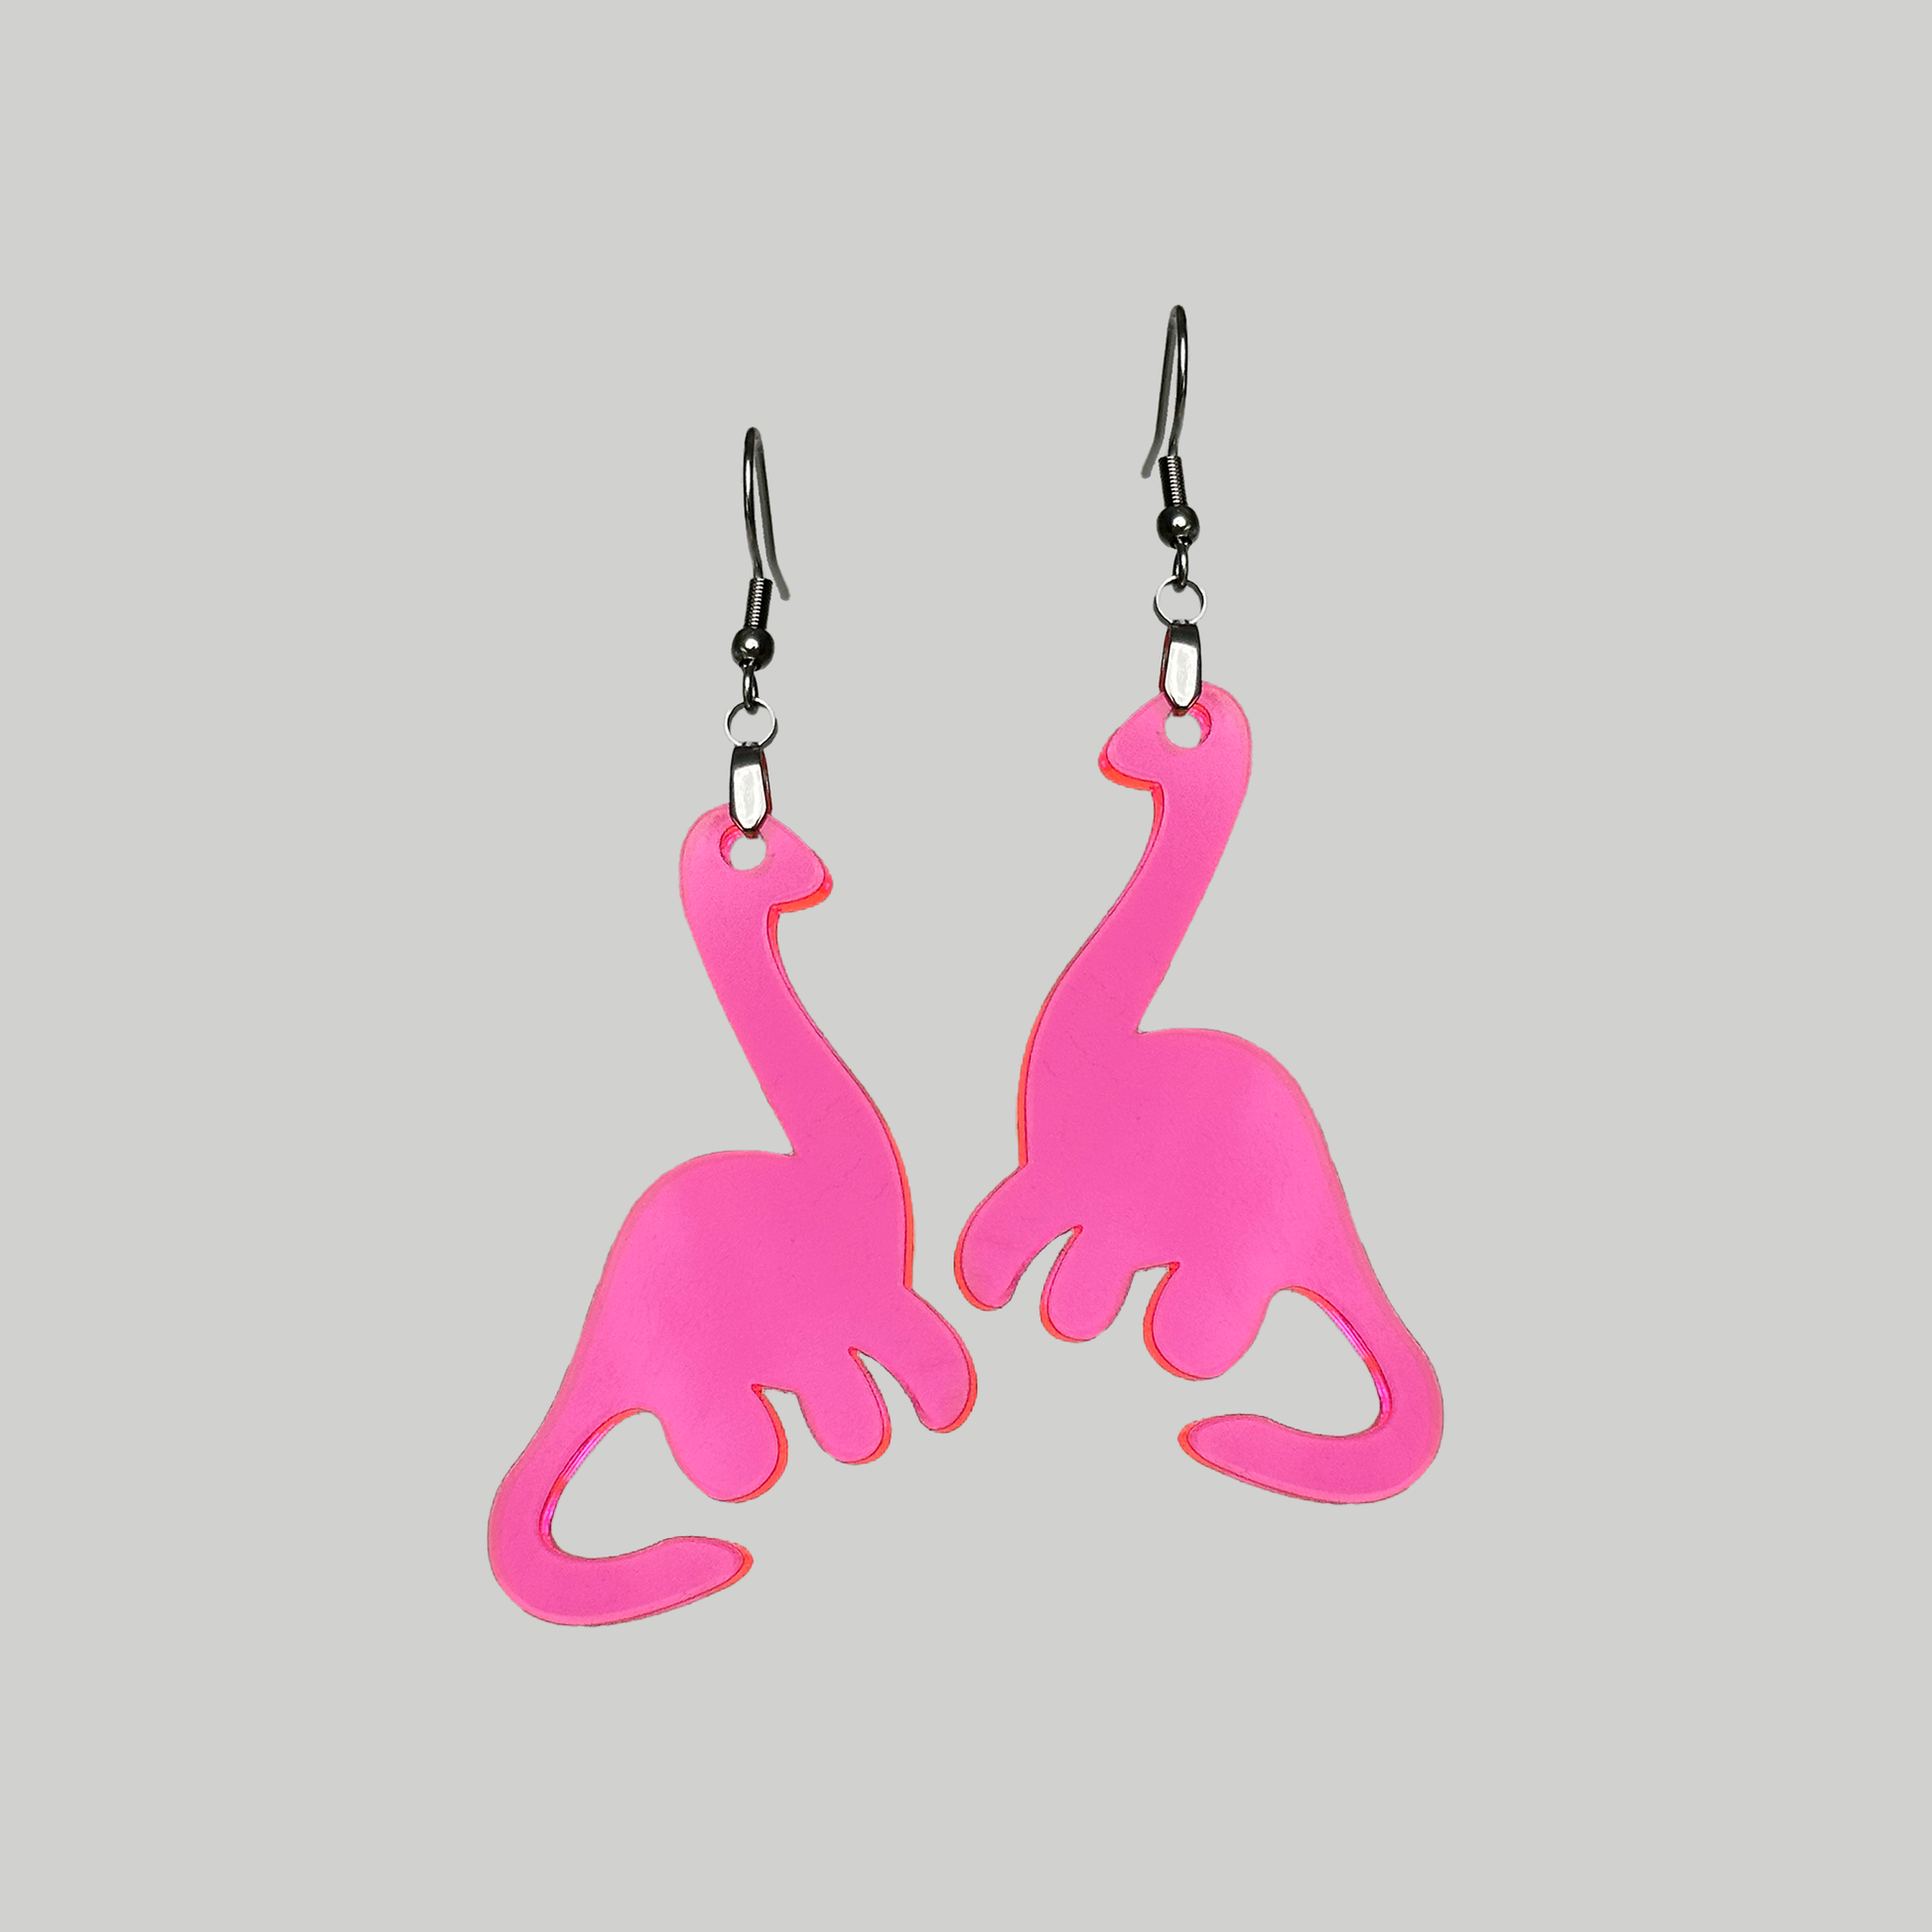 Pink Brachiosaurus dinosaur earrings, a delightful and charming accessory to accentuate your style with a touch of prehistoric whimsy.